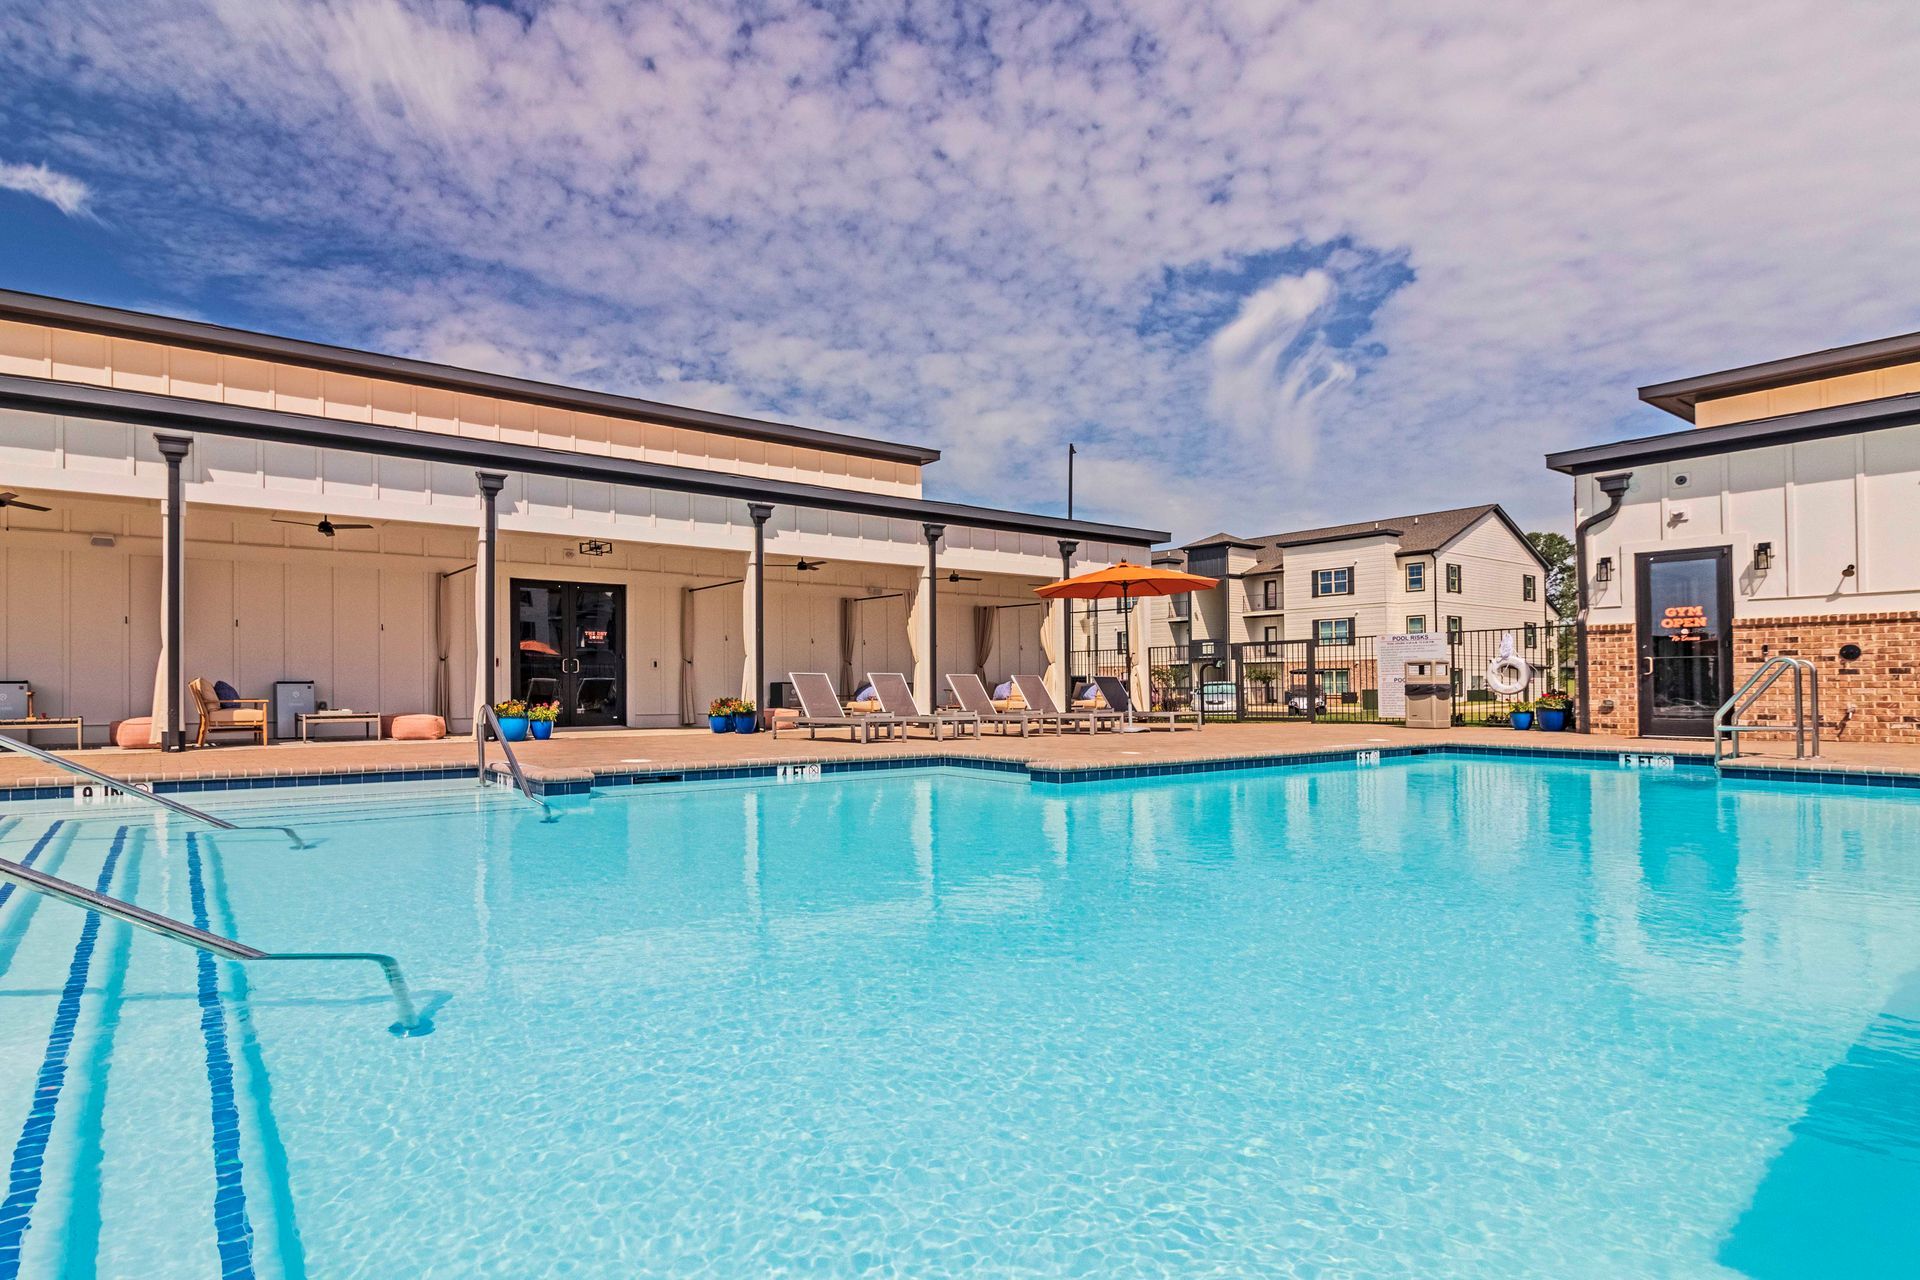 A large swimming pool in the middle of an apartment building at Pointe Grand Warner Robins.